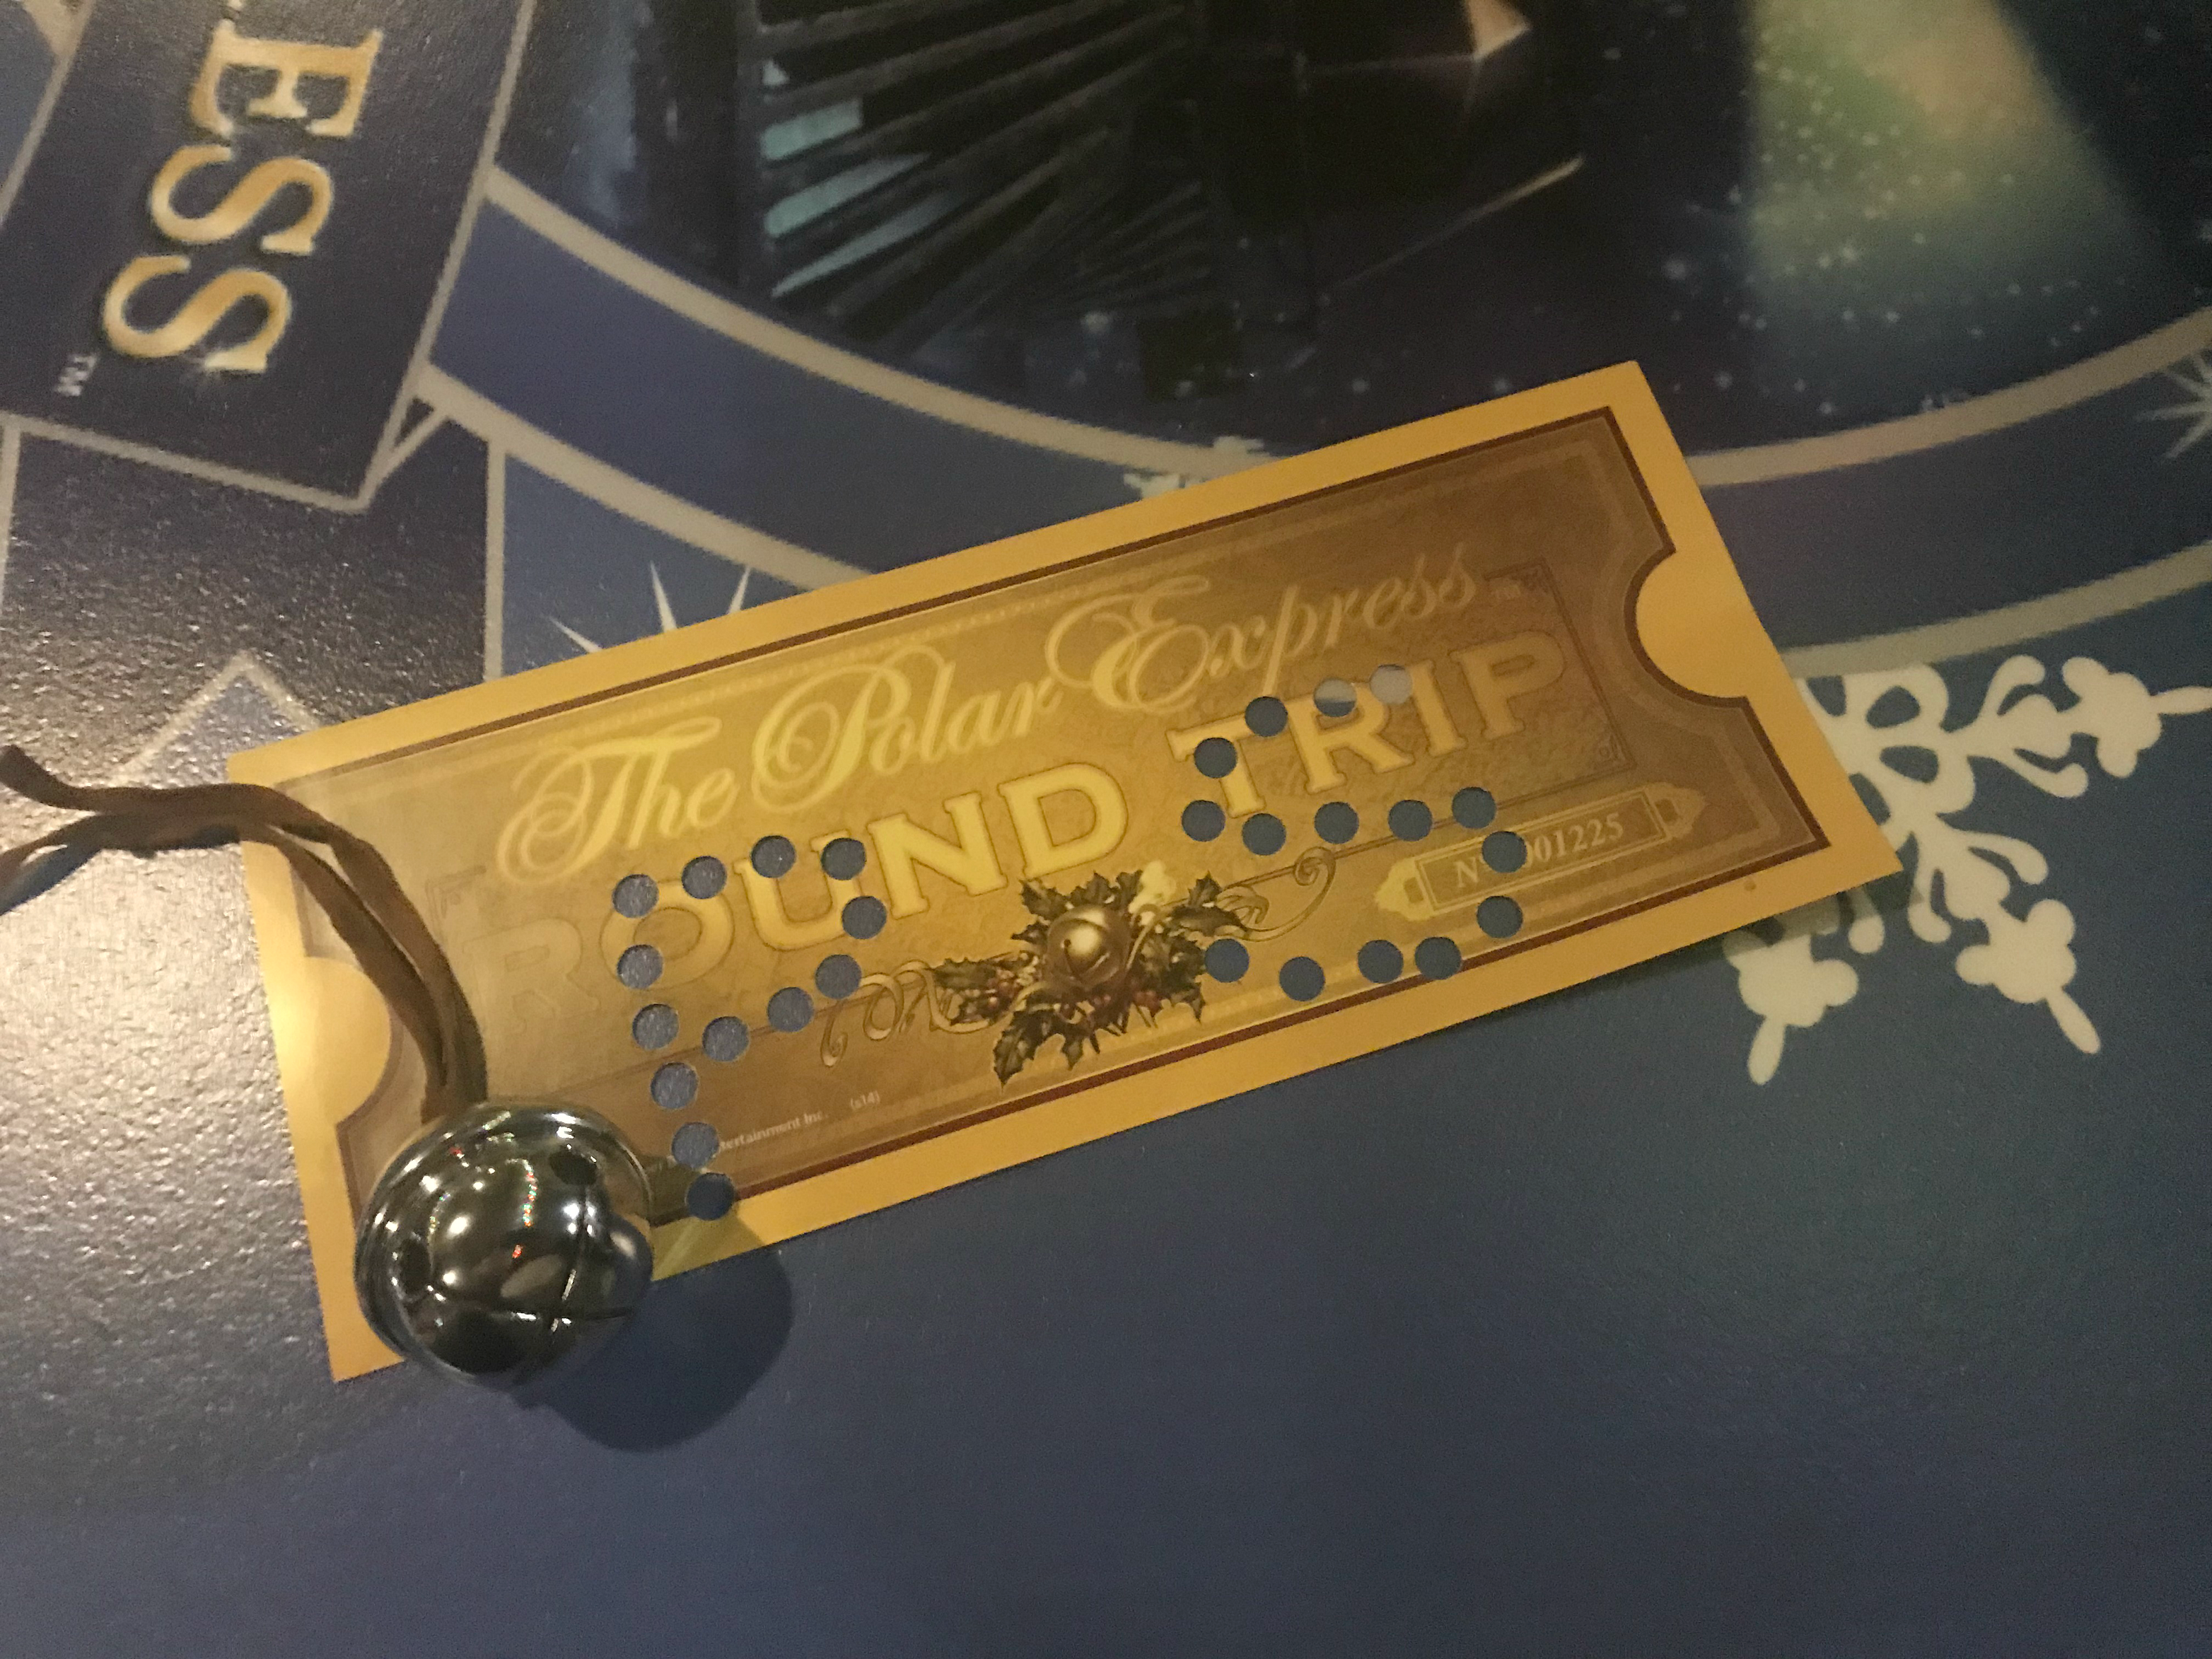 Union Station Polar Express train ticket and bell.